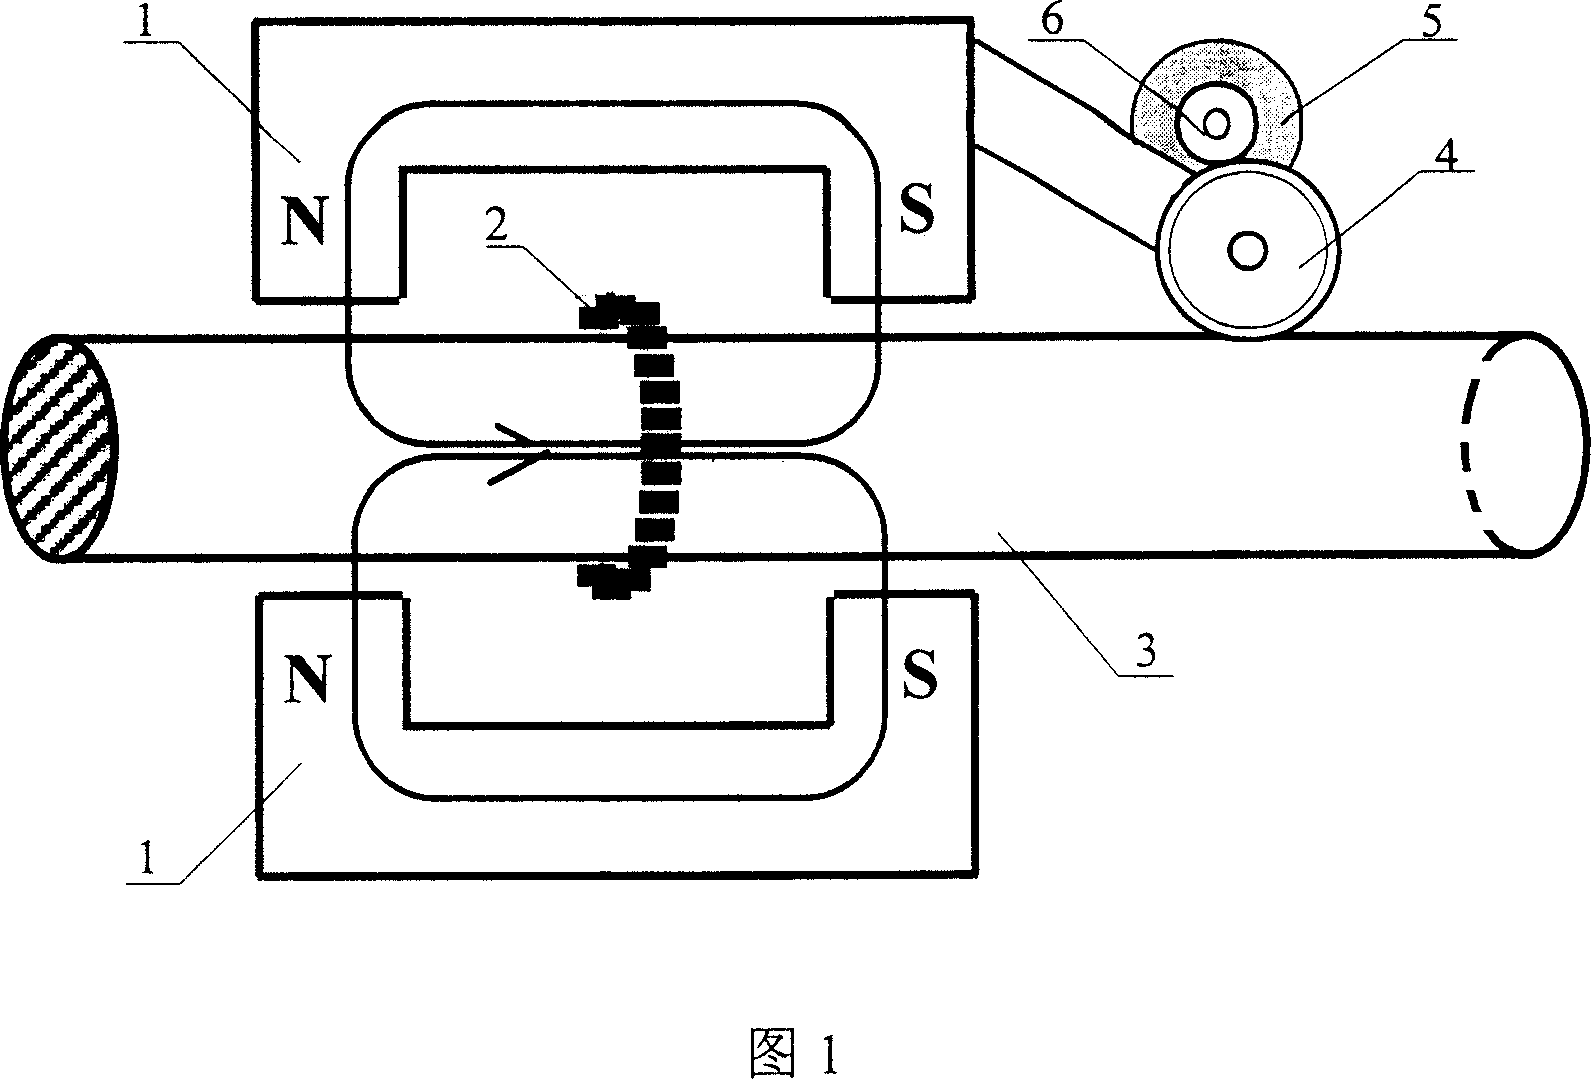 Hall sensor array based steel ropes nondestructive examination method and device